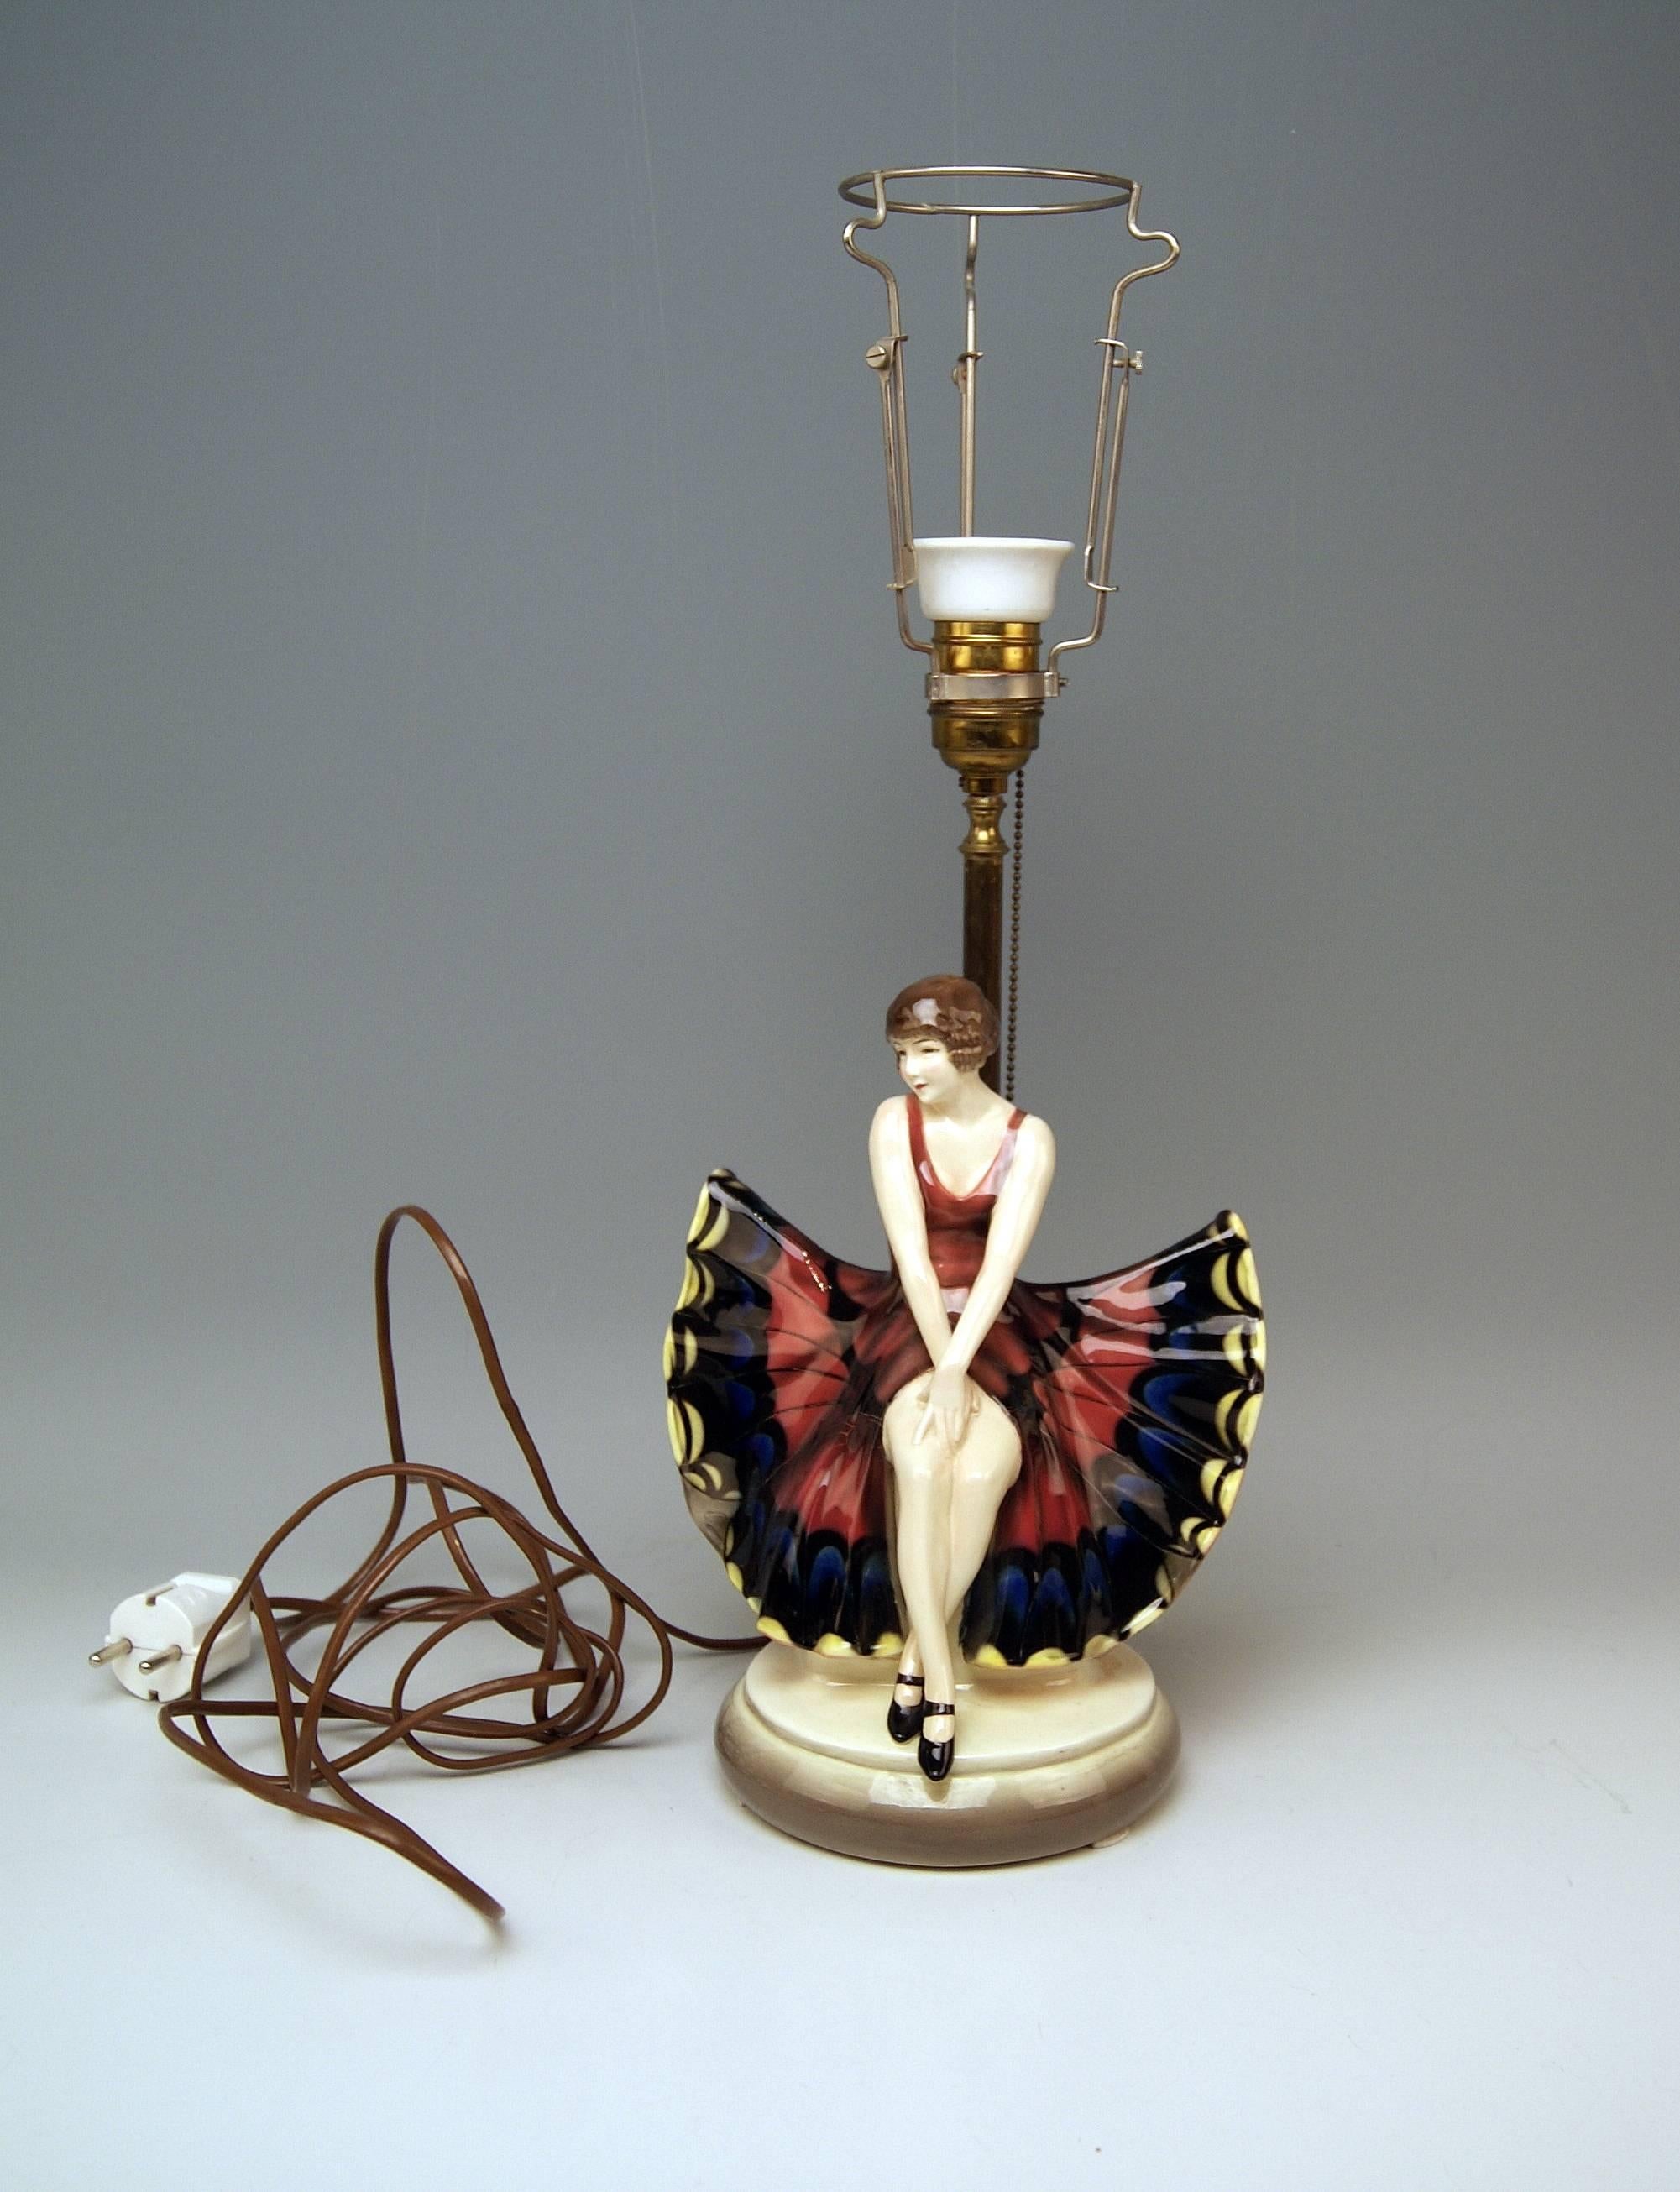 Goldscheider Vienna gorgeous table lamp with butterfly lady figurine

Model created by Josef Lorenzl (1892-1950) / one of the most important designers having been active for Goldscheider manufactory in period of 1920-1940 / designed, circa